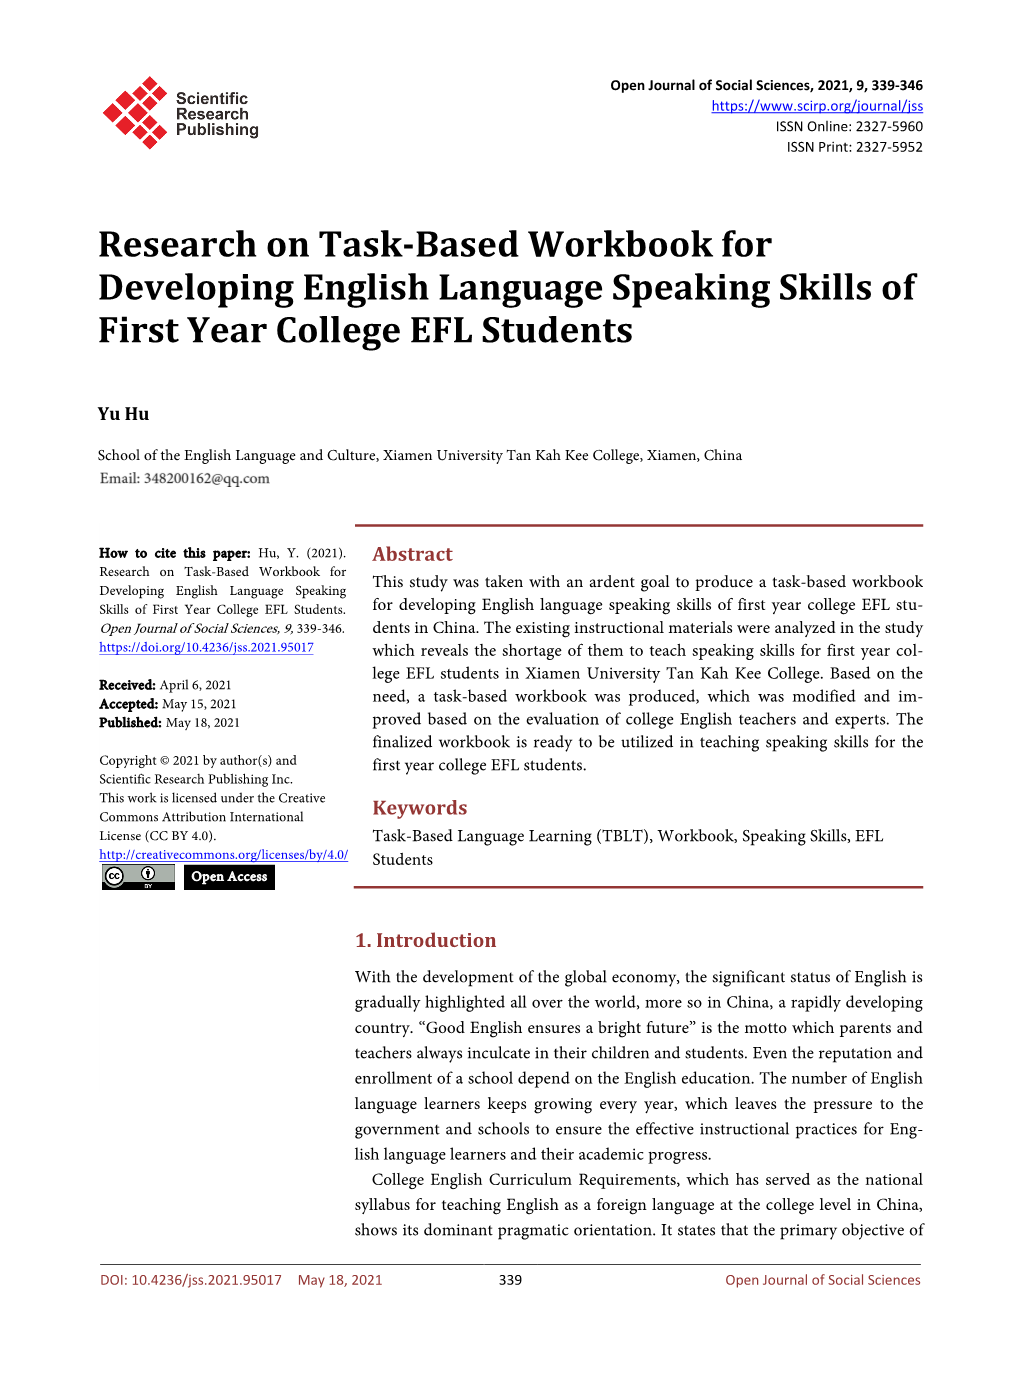 Research on Task-Based Workbook for Developing English Language Speaking Skills of First Year College EFL Students